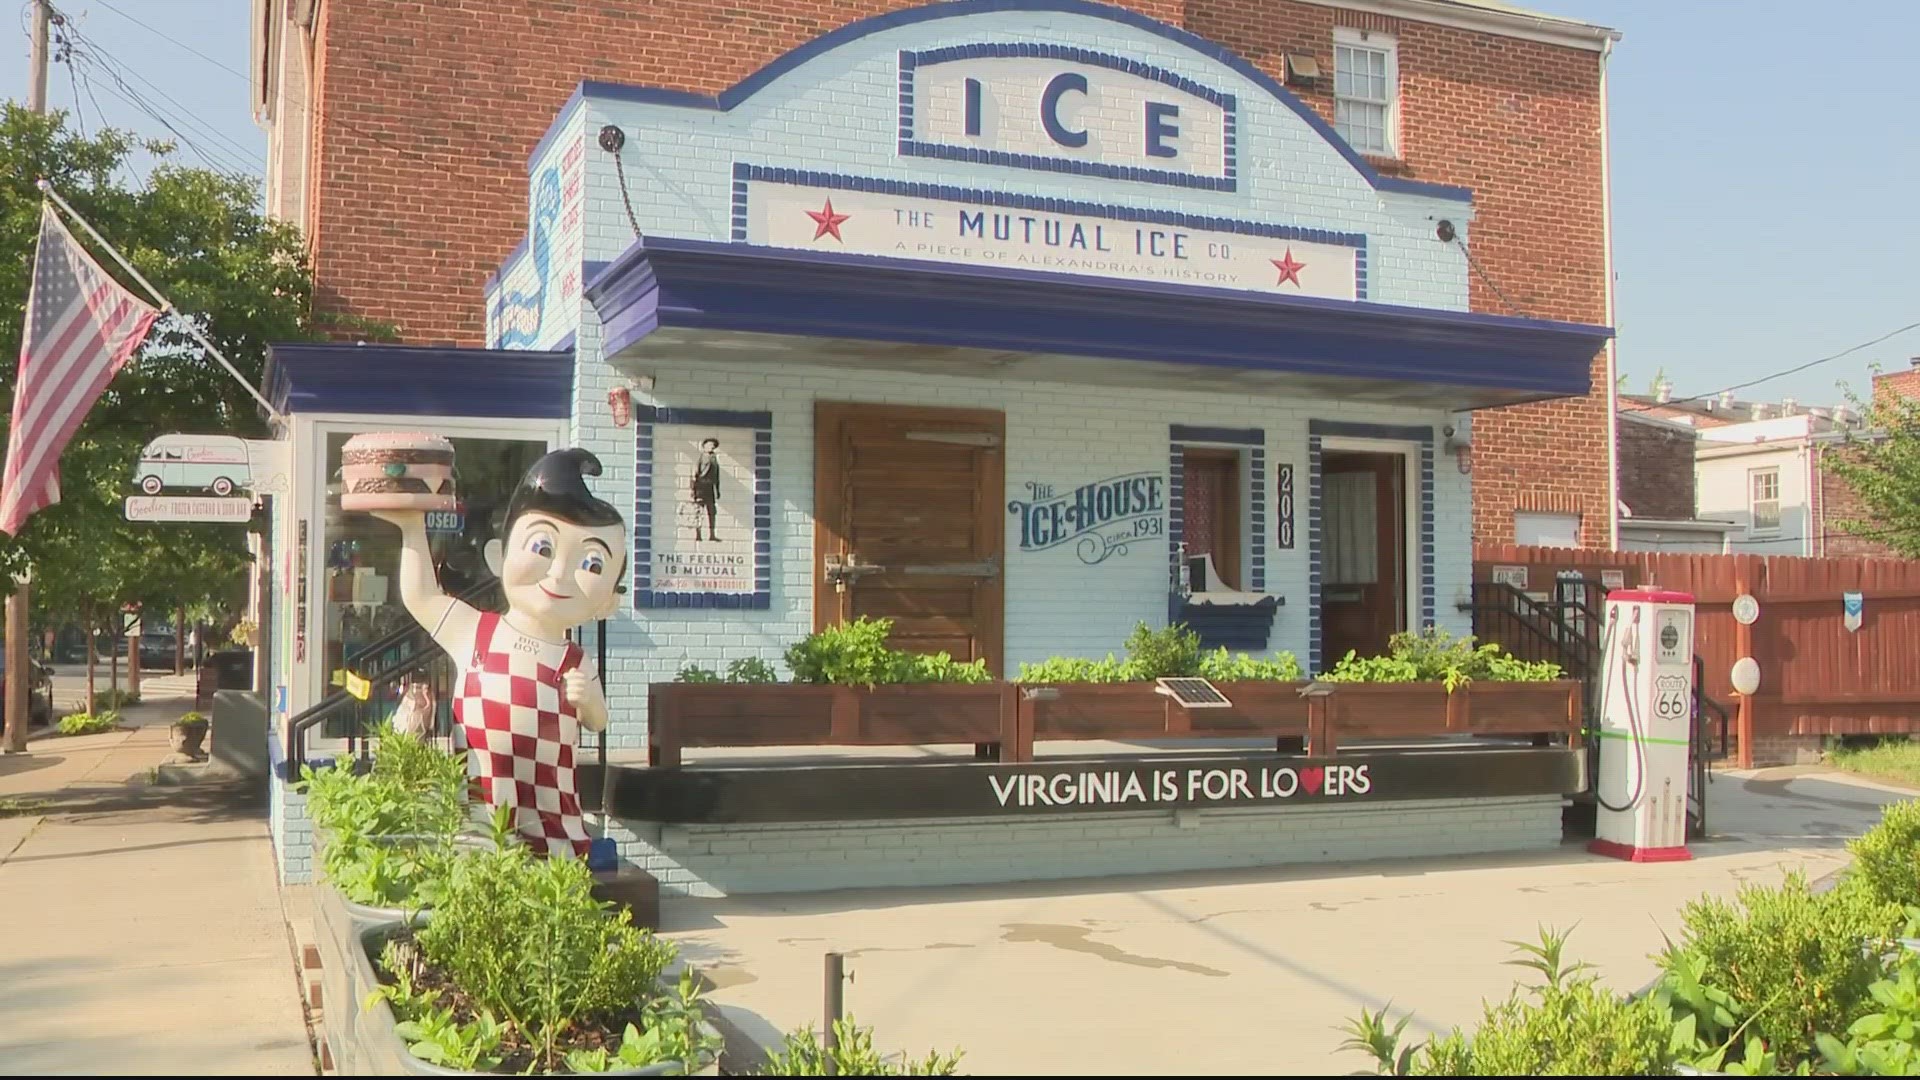 This vintage ice cream shop is one reason neighbors love where they live.